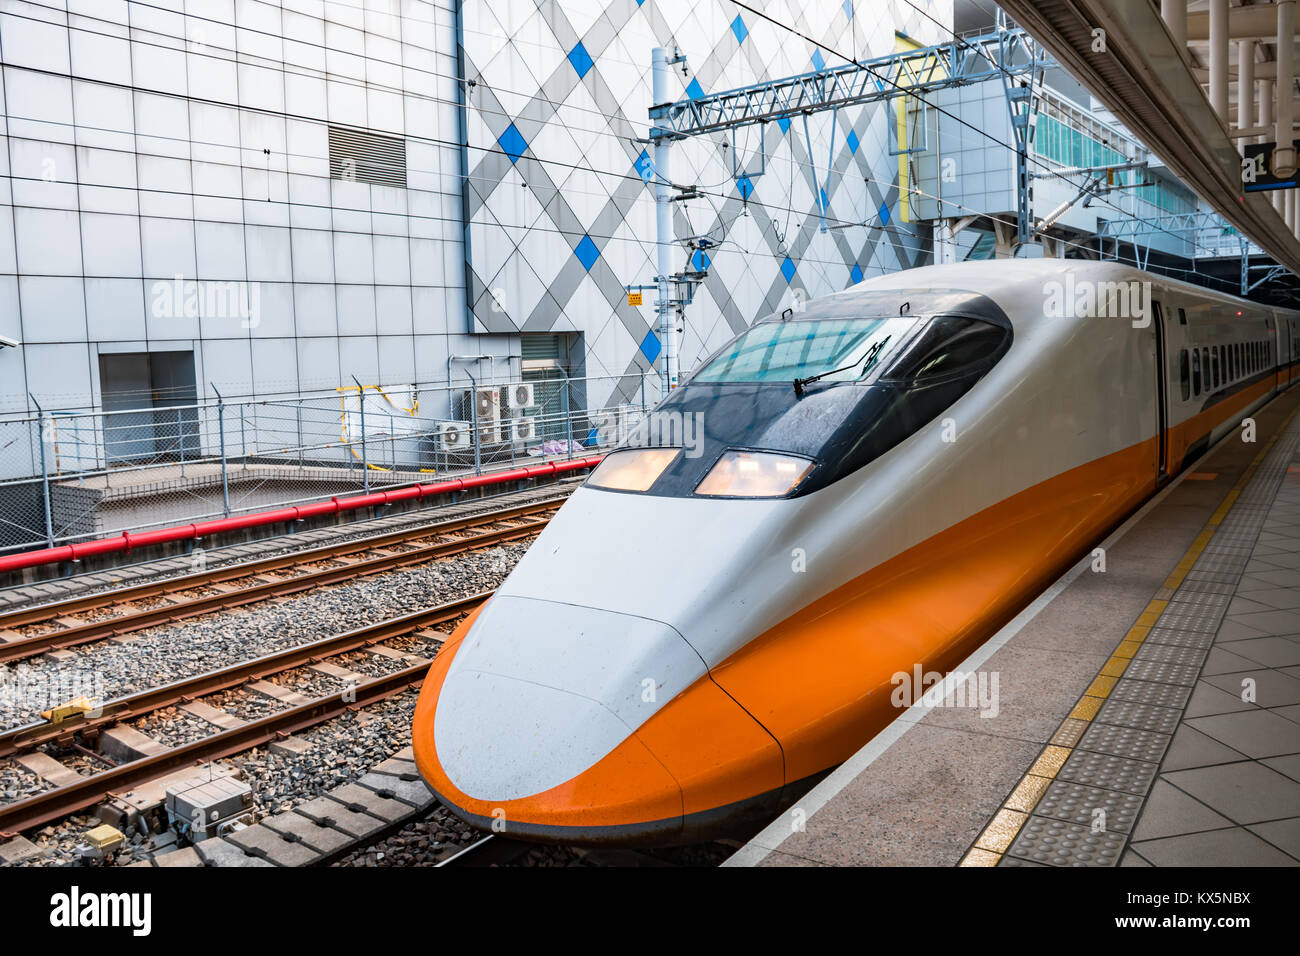 Taiwan High Speed Rail at Zuoying Station. The line spans 349.5km along west coast of Taiwan, from capital Taipei to the southern city of Kaohsiung. Stock Photo